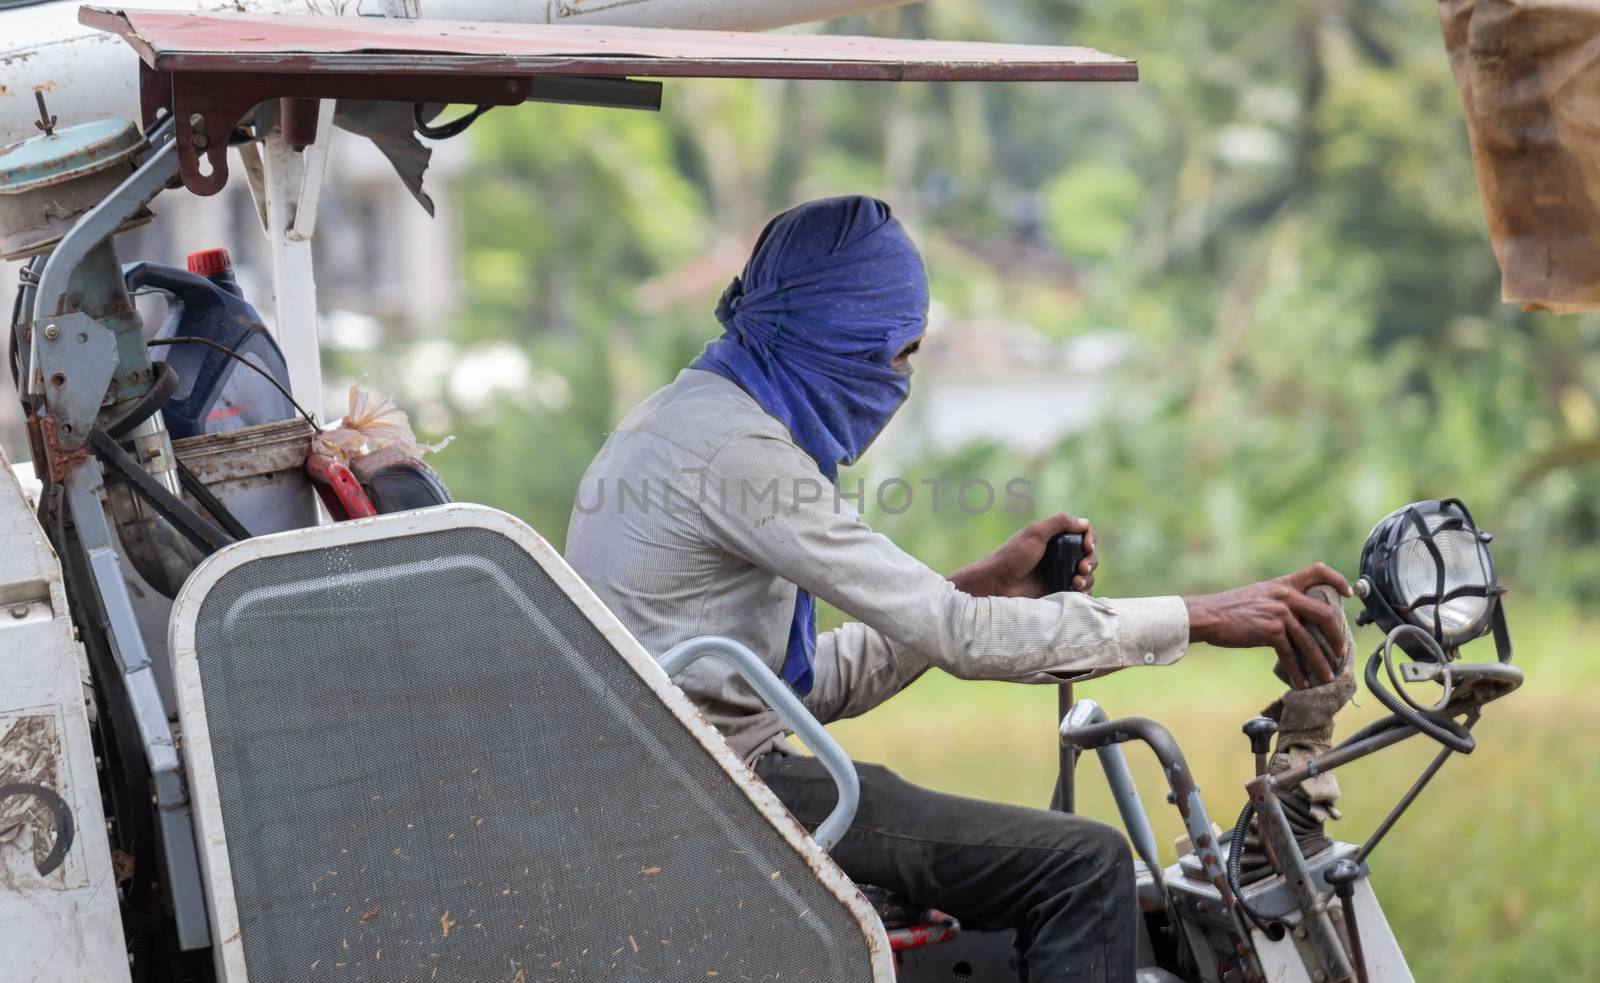 Face covered man in hot conditions as he operates combine harvester in the paddy field.